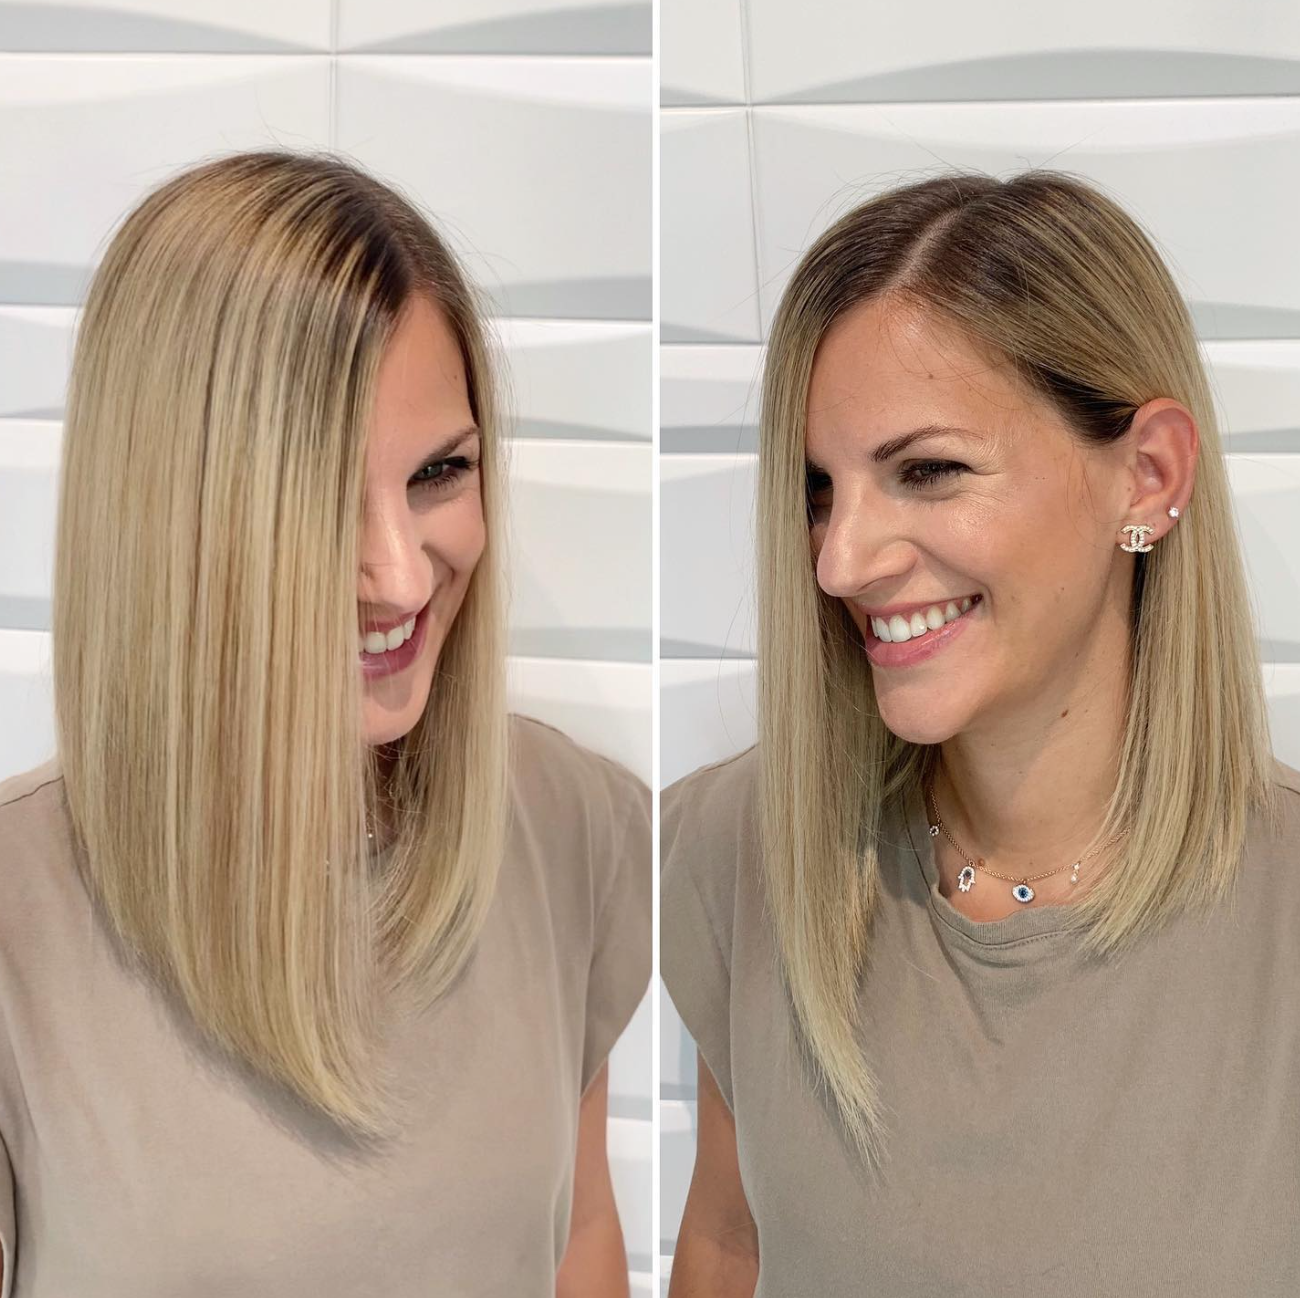 A duo of photos of a smiling blonde haired woman.